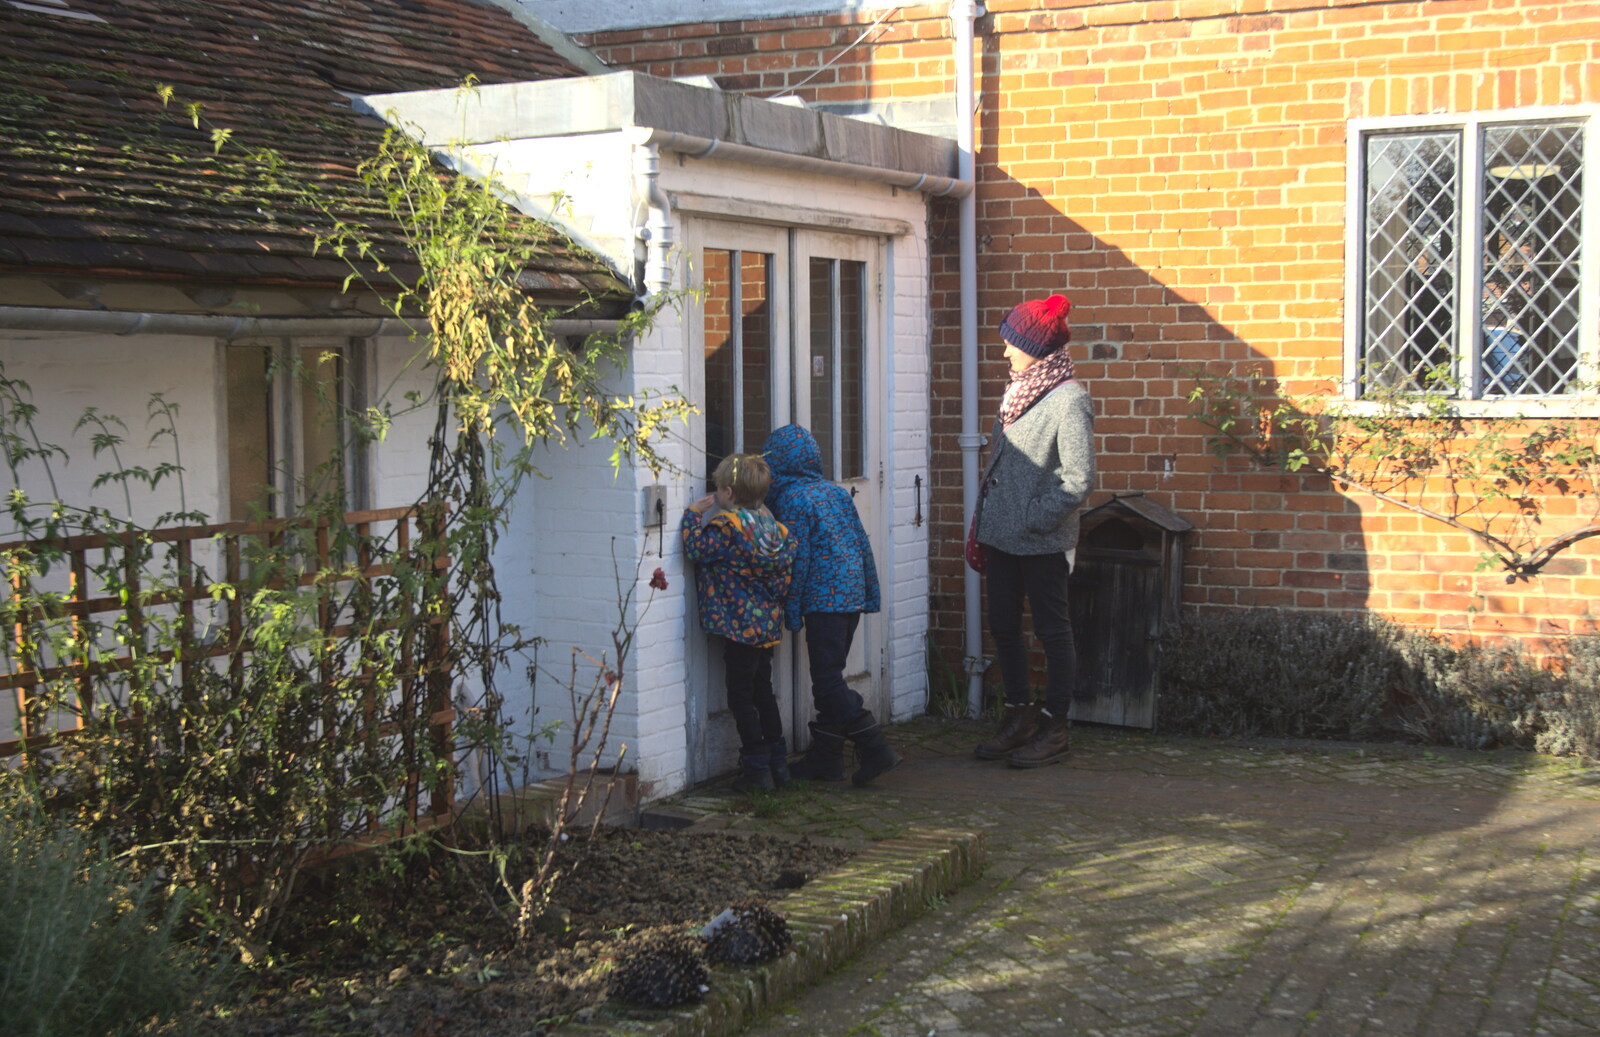 The boys peer into a door from A Day in Lavenham, Suffolk - 22nd January 2017